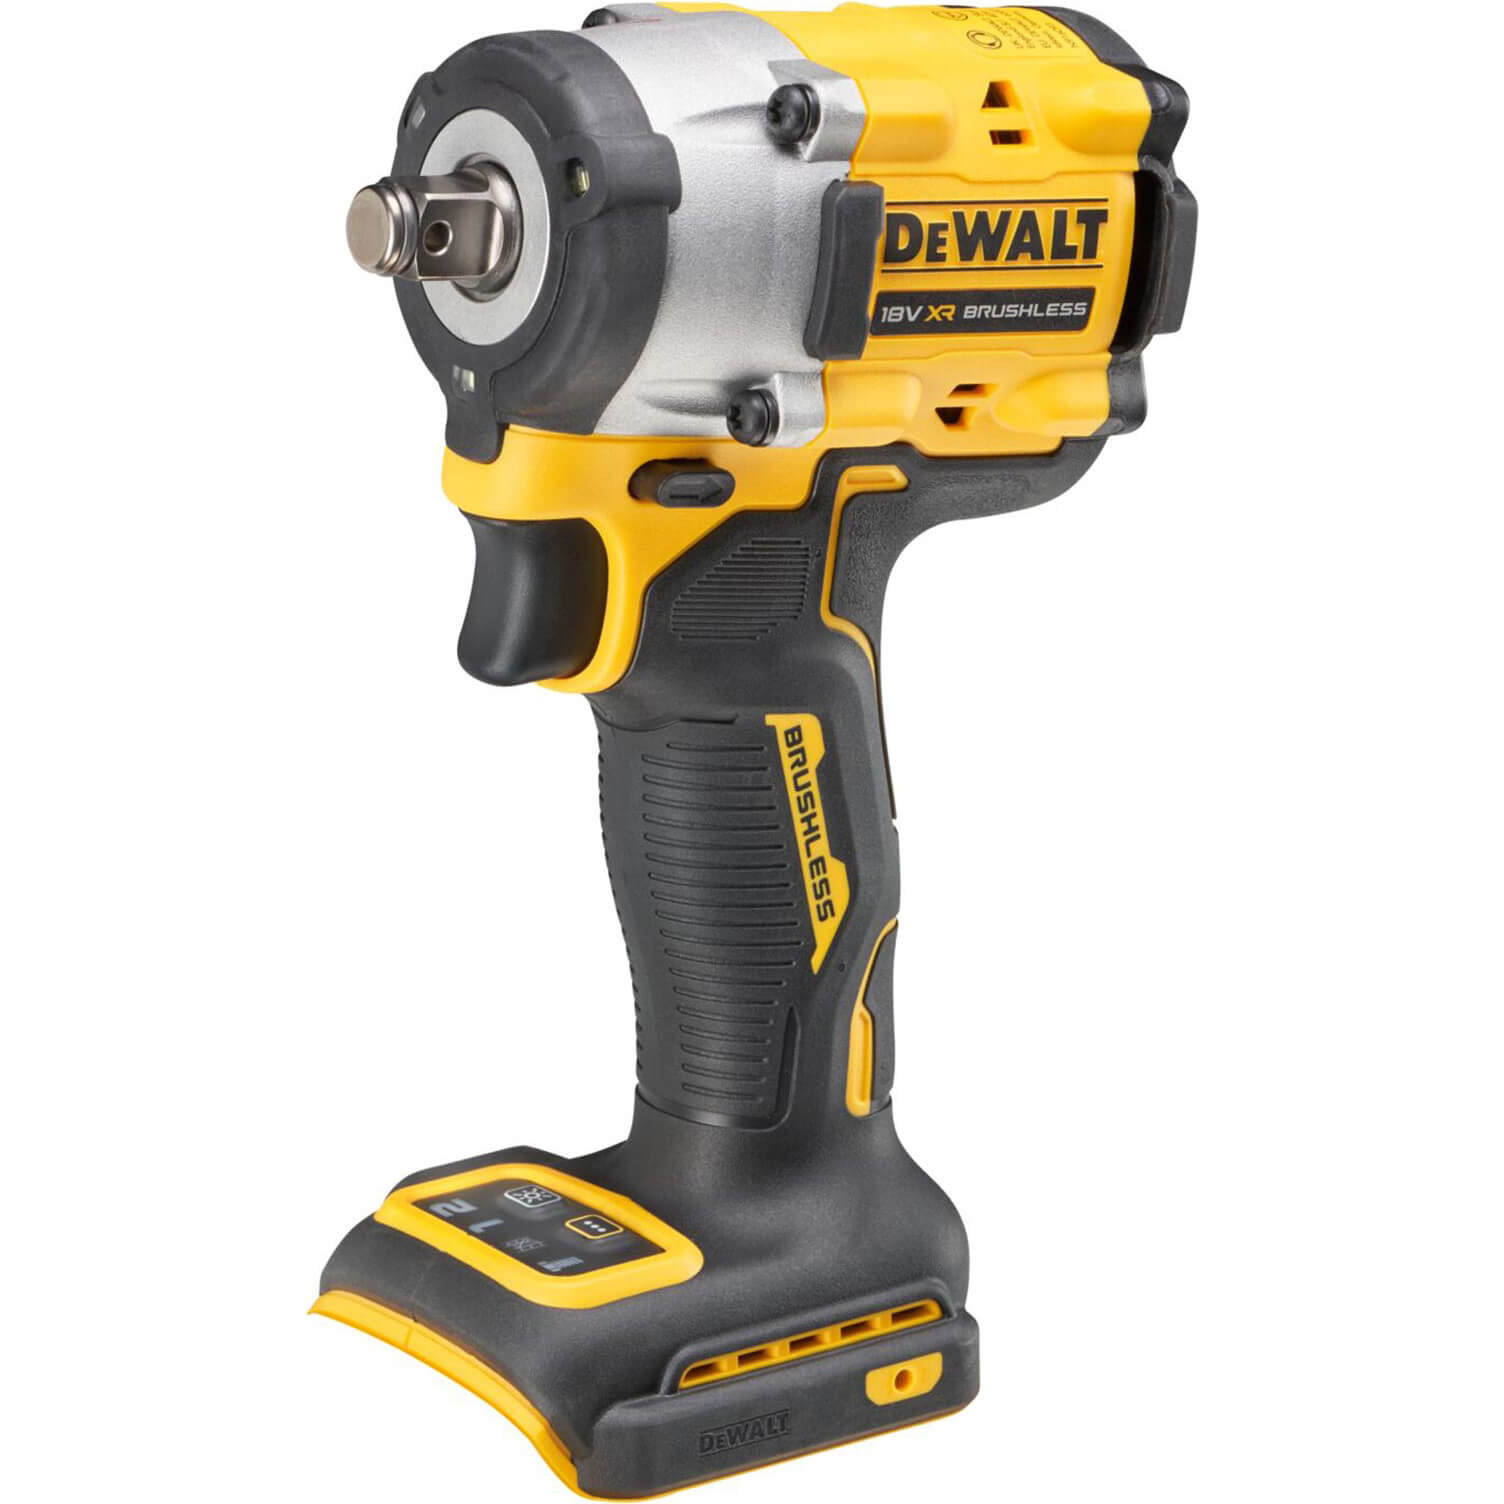 Image of DeWalt DCF921 18v XR Cordless Brushless 1/2" Compact Impact Wrench No Batteries No Charger No Case